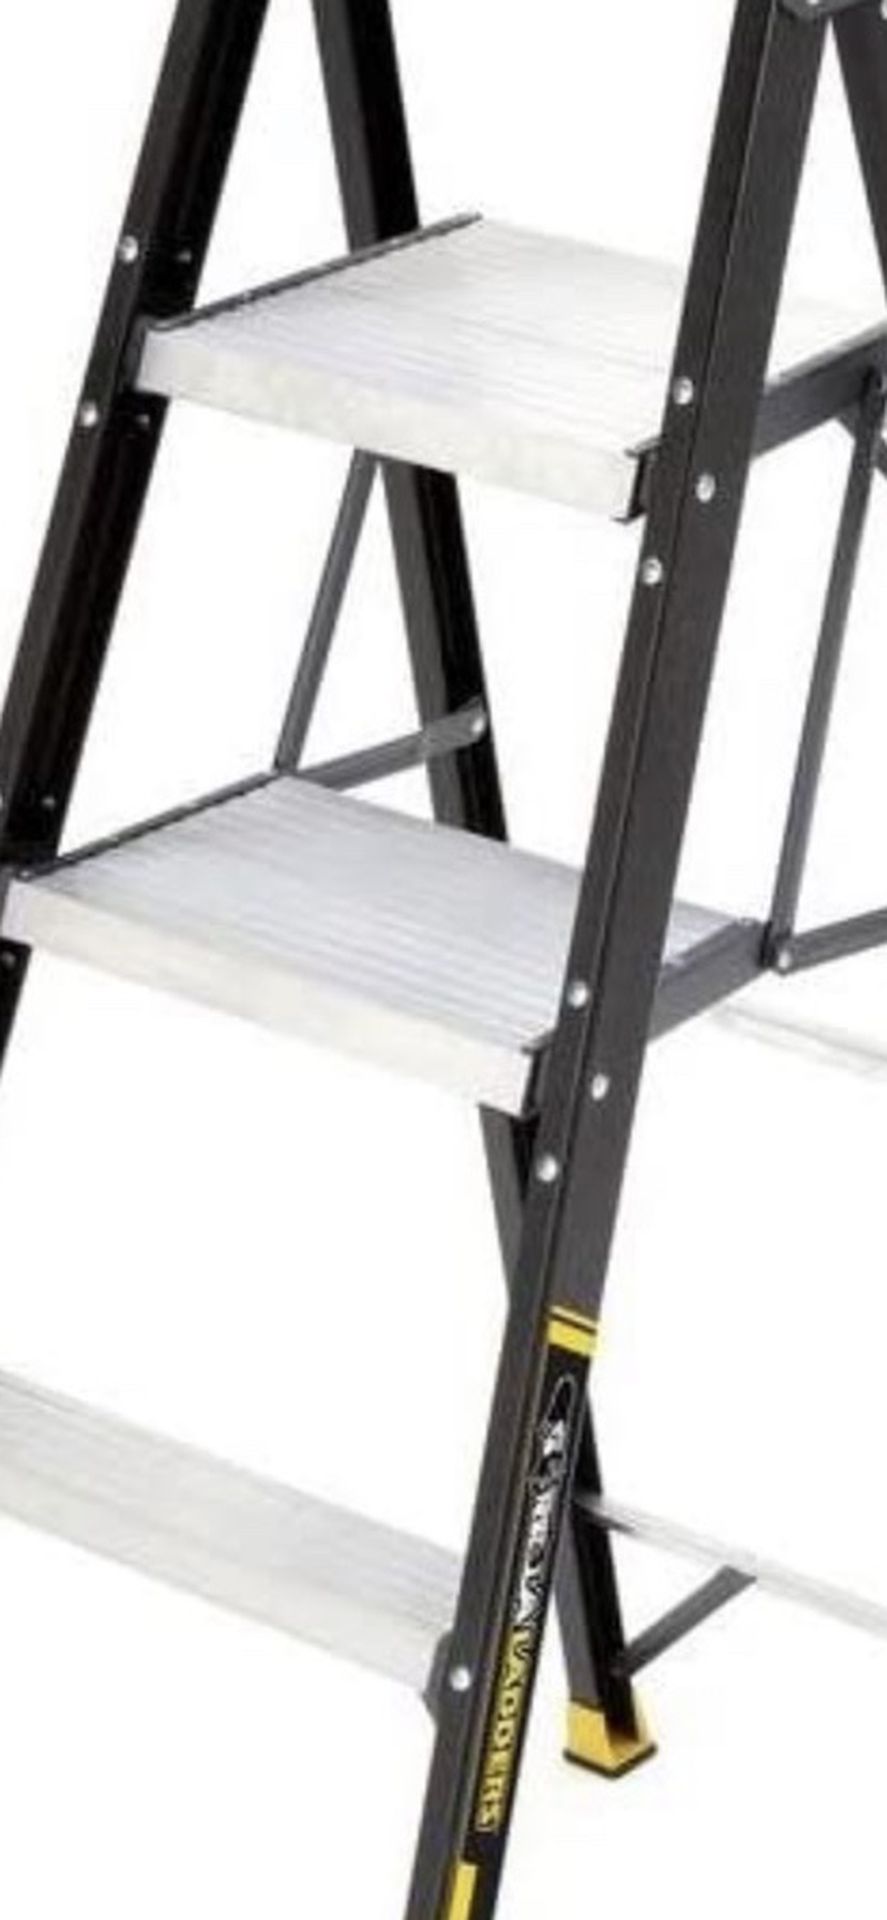 Brand: Gorilla Ladders Gorilla Ladders 5.5 ft. Fiberglass Hybrid Ladder with 250 lb. Load Capacity Type I Duty Rating (Comparable to 6 ft. Step